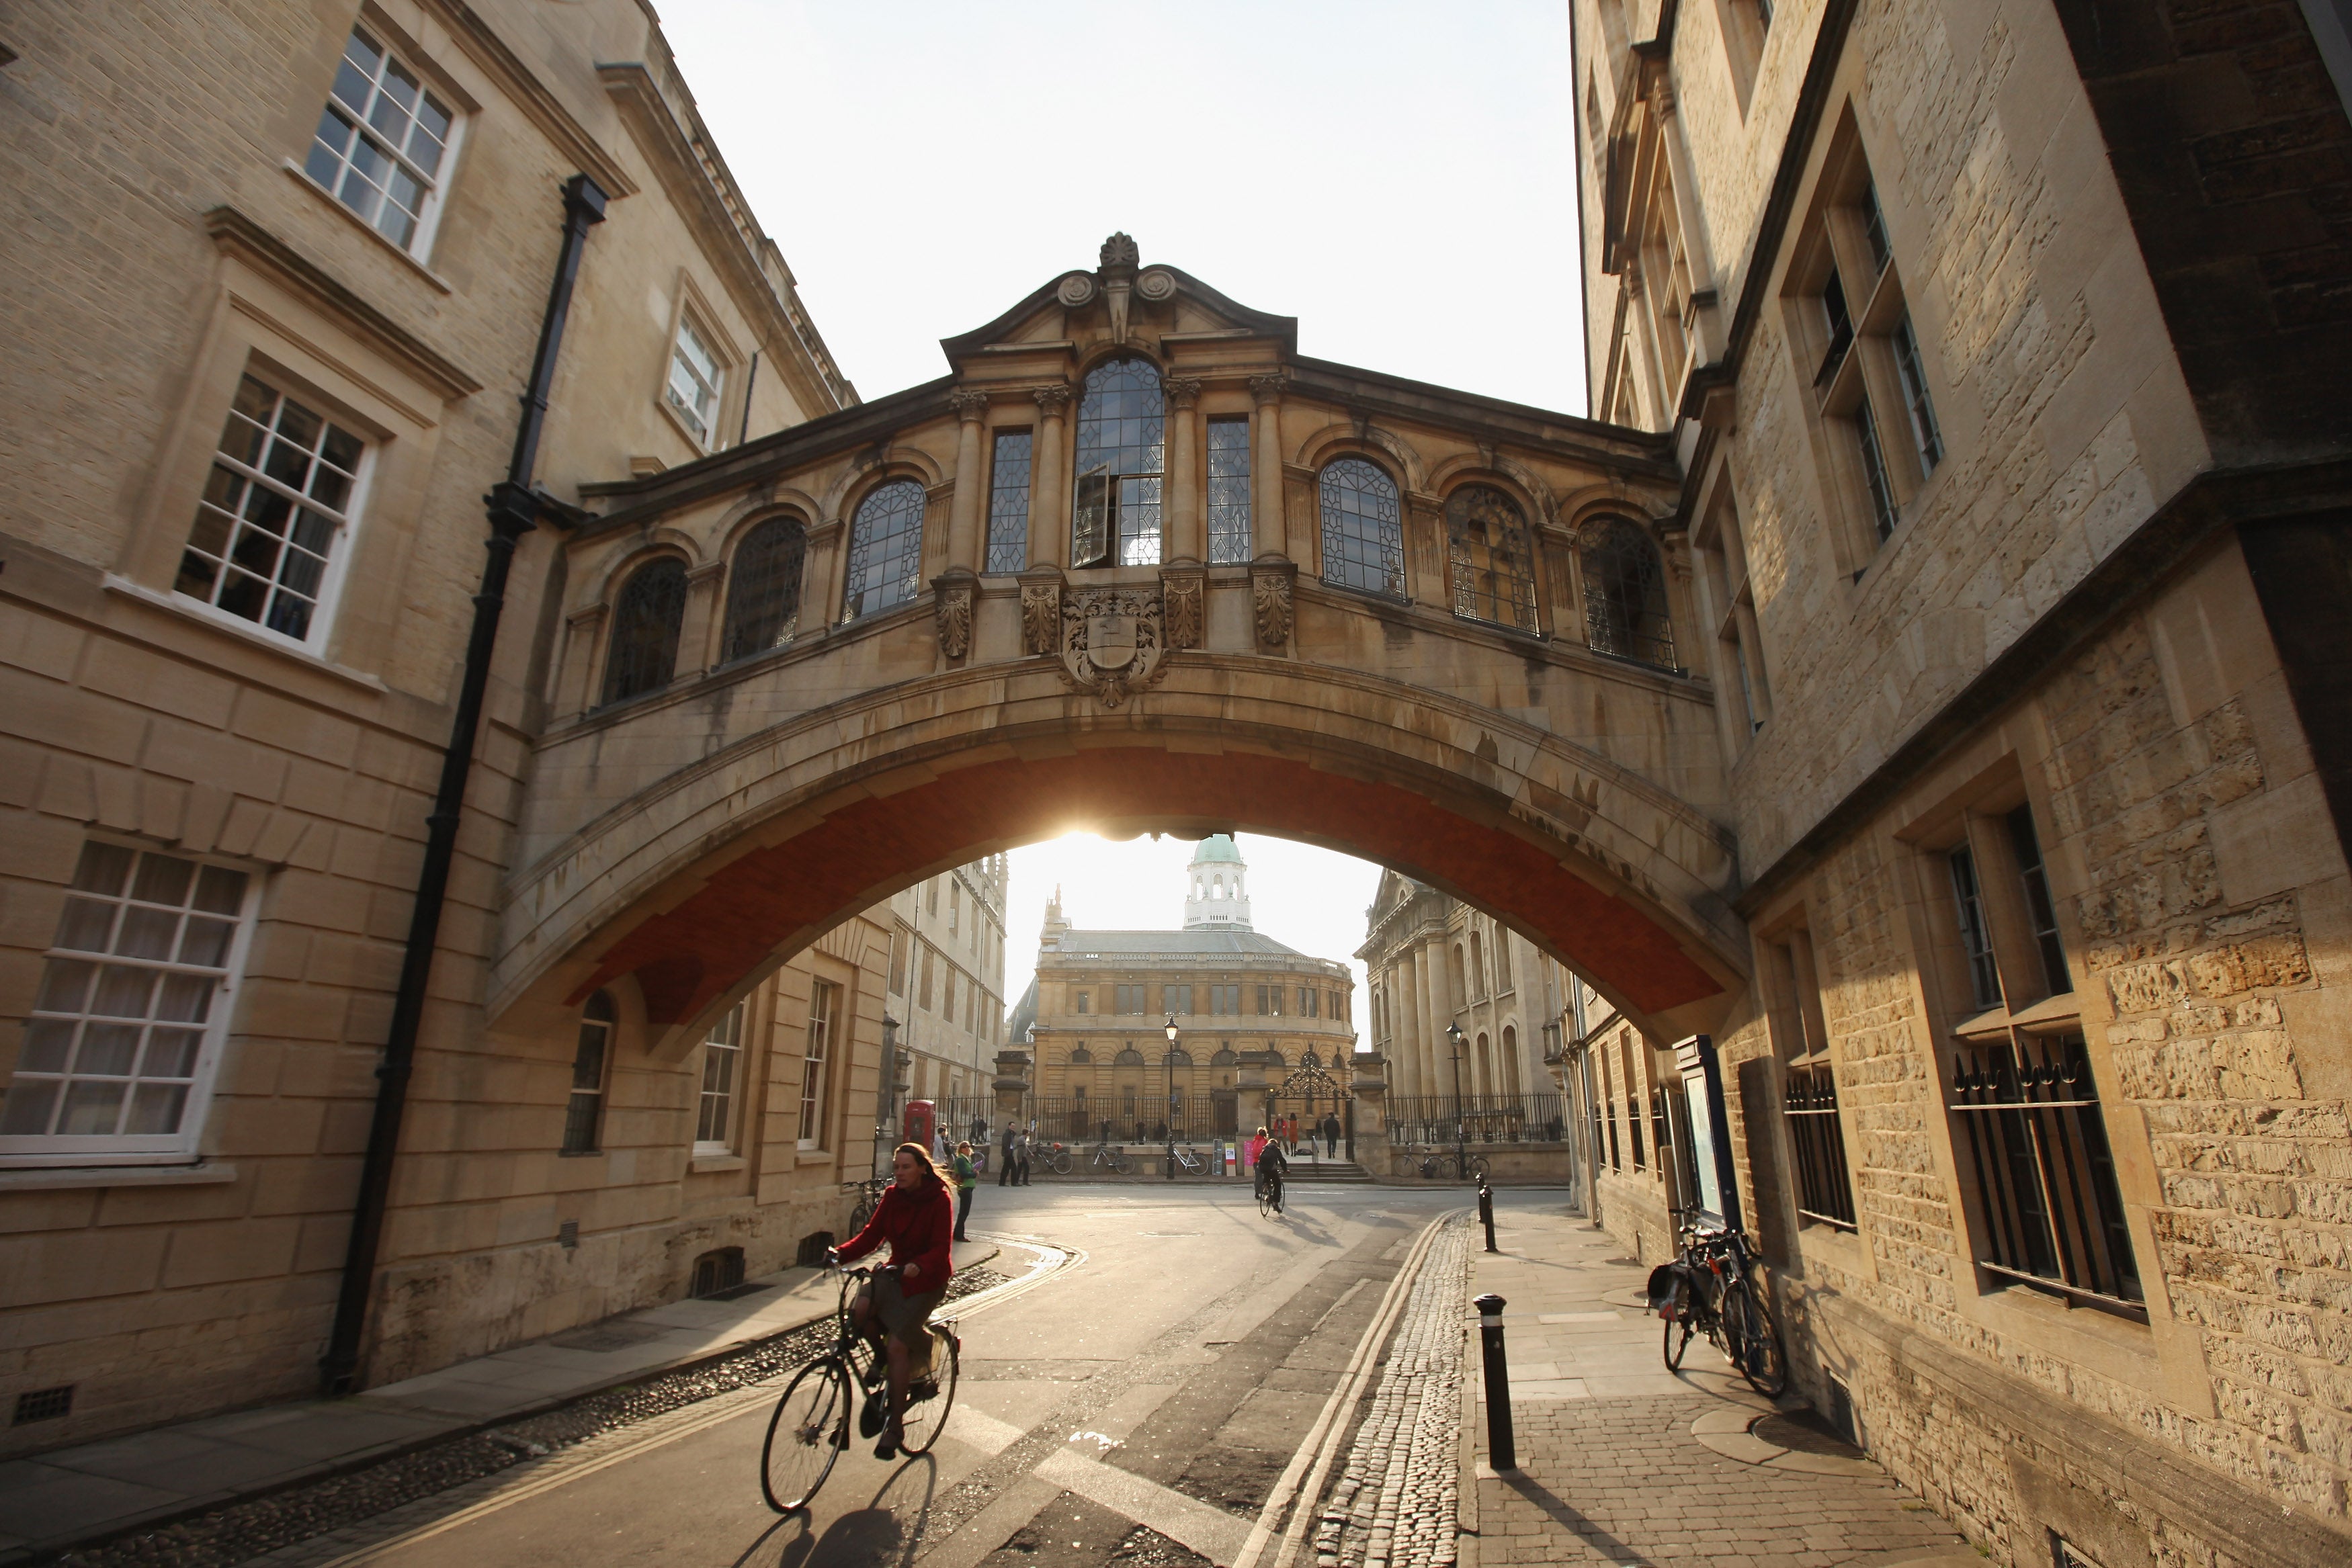 Oxford has been named the most house proud city